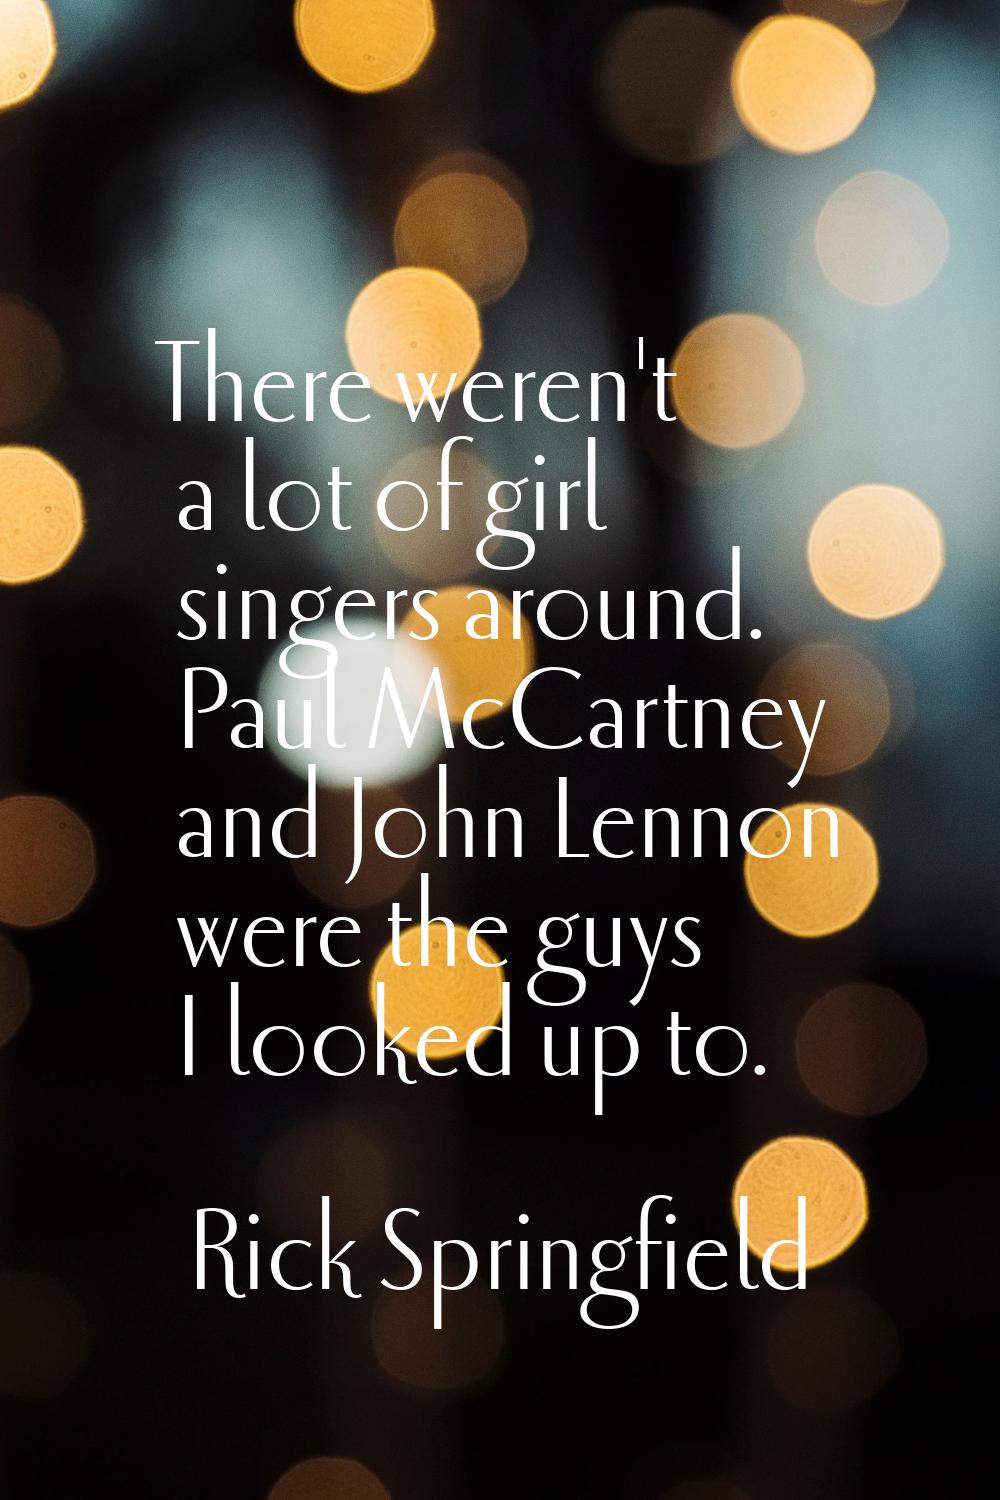 There weren't a lot of girl singers around. Paul McCartney and John Lennon were the guys I looked u